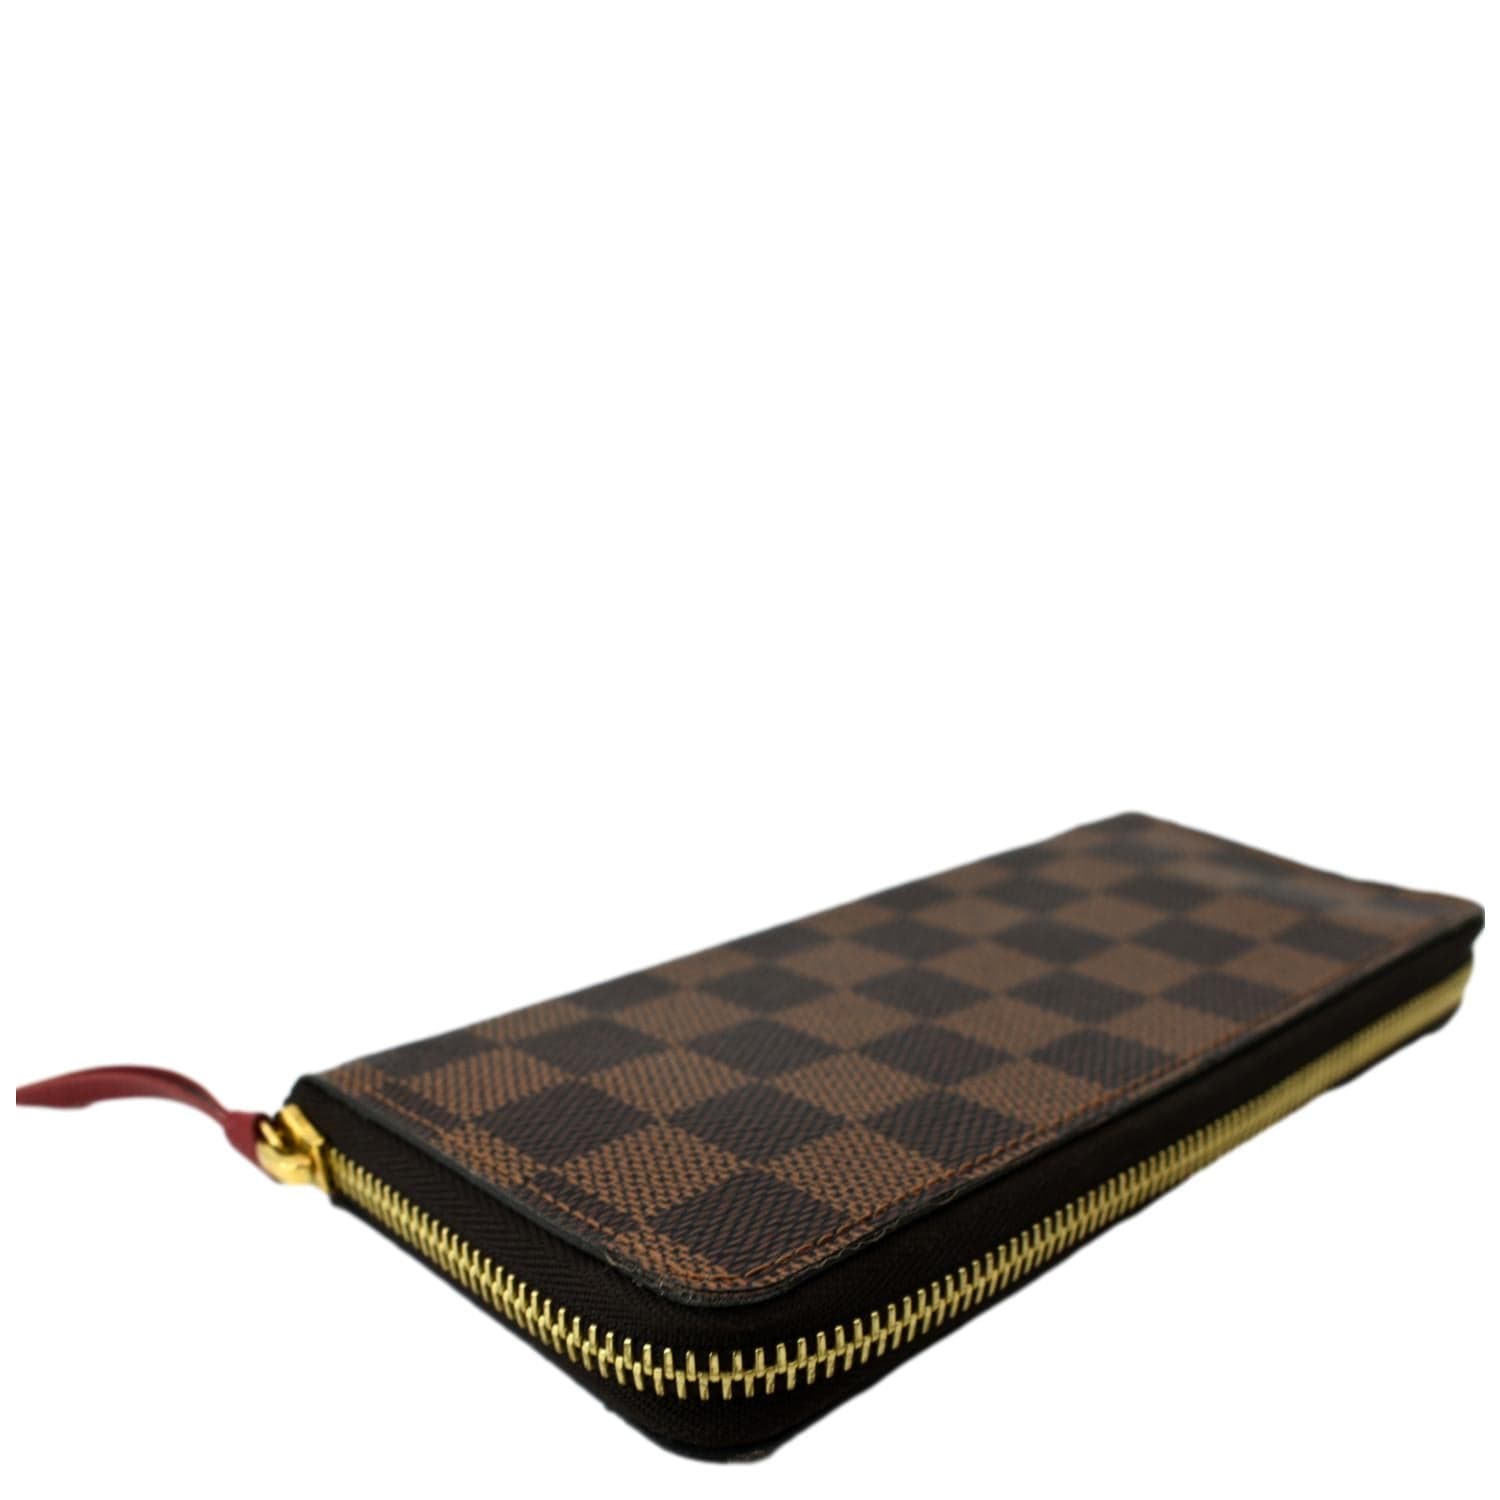 Clemence leather wallet Louis Vuitton Brown in Leather - 28145489